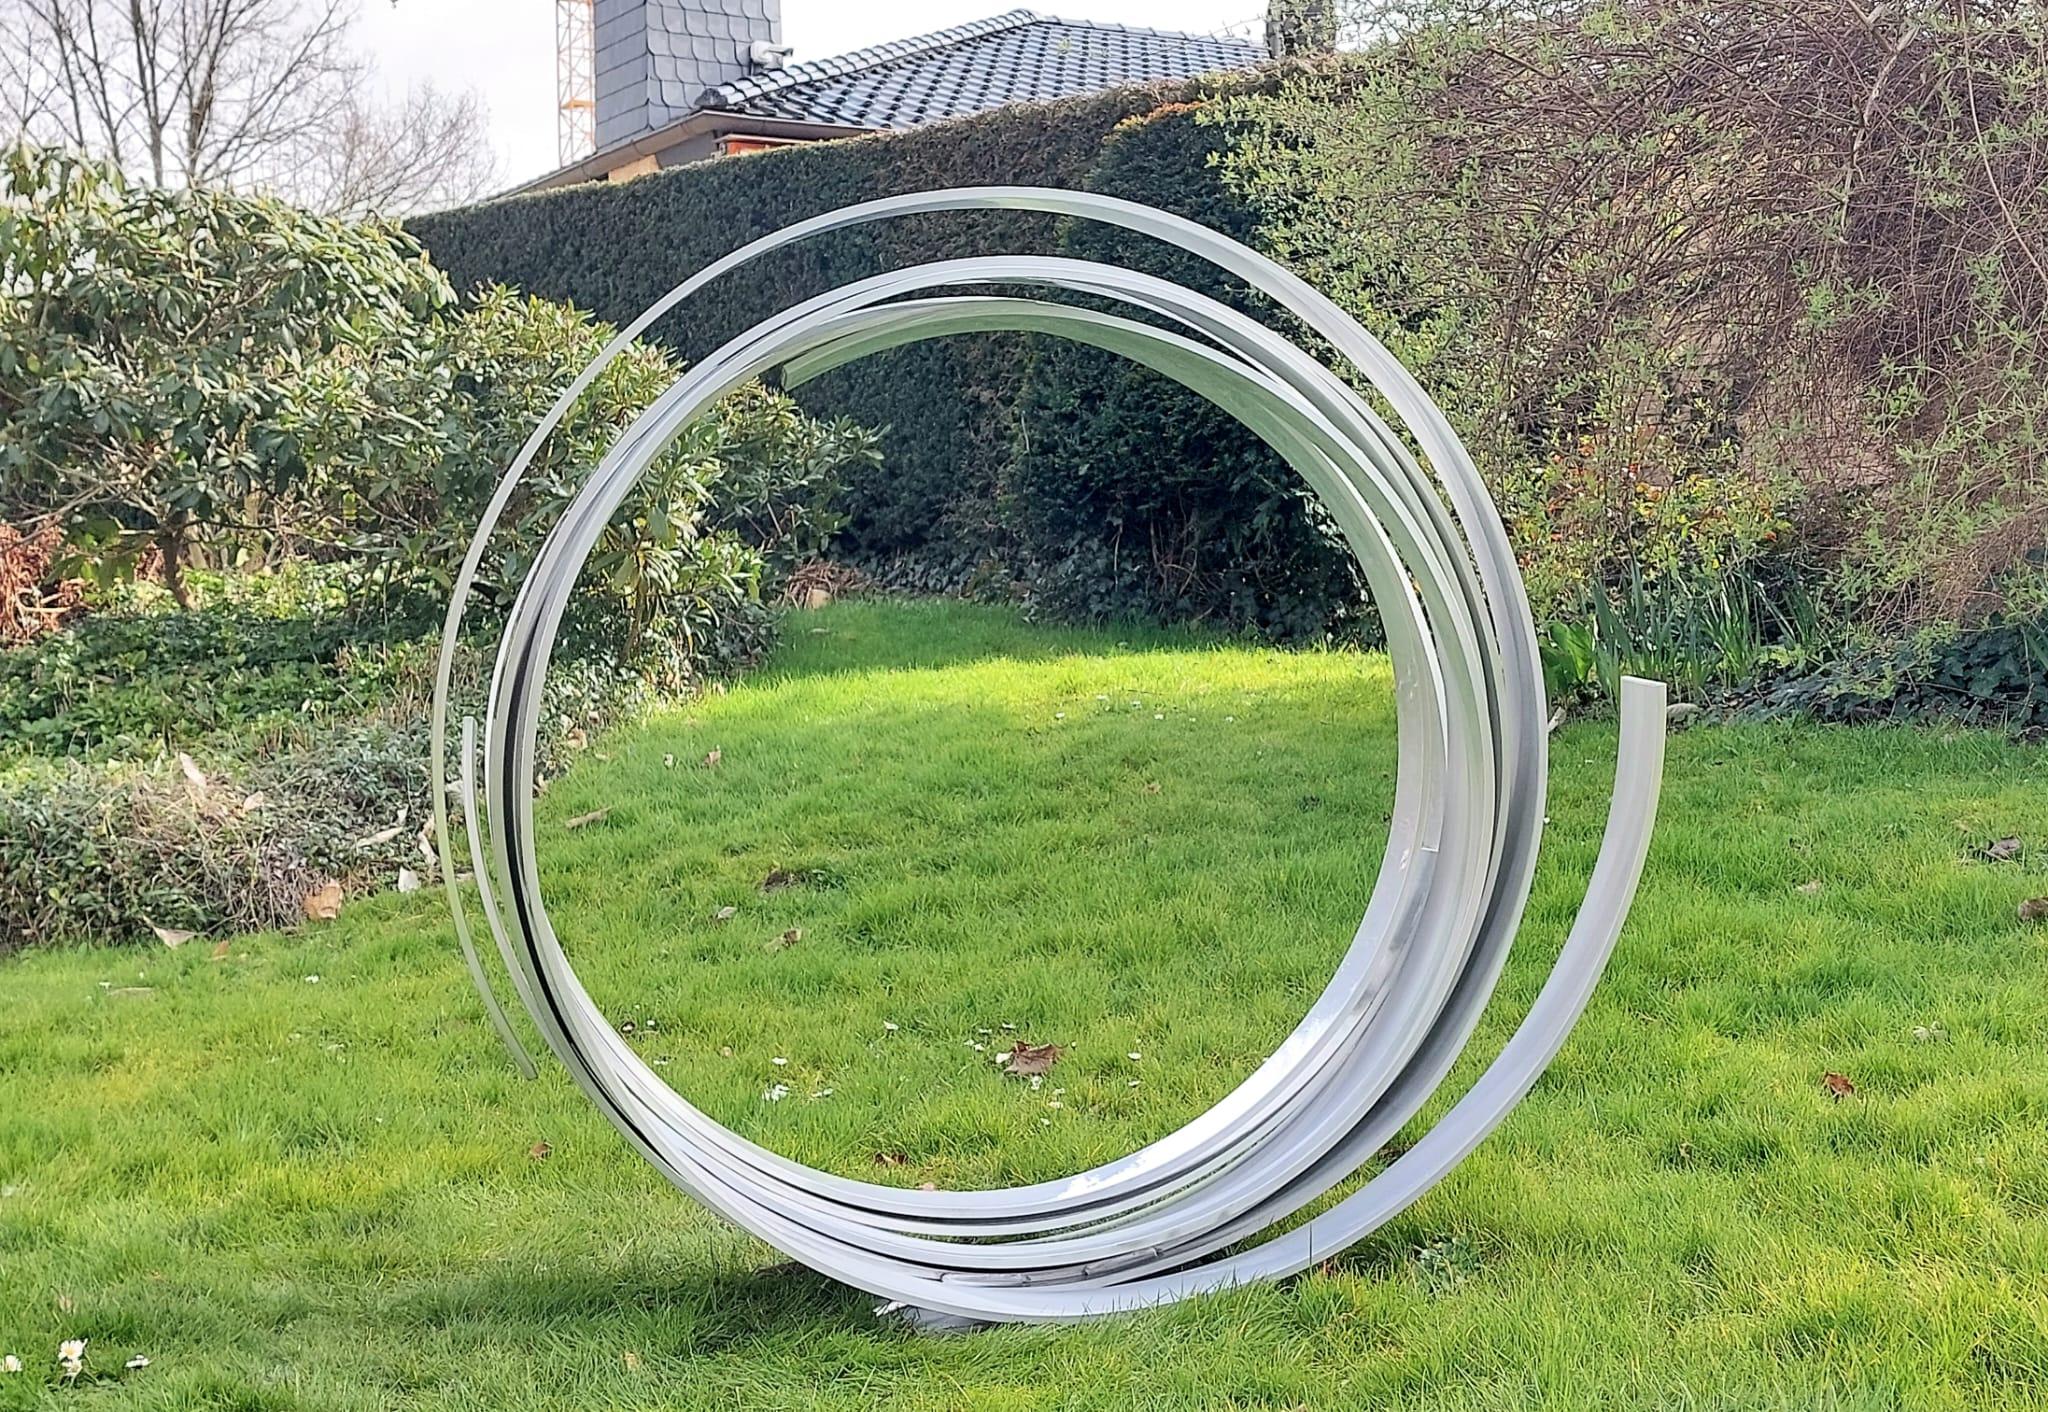 Timeless Orbit - Silver Contemporary Aluminum sculpture for Outdoors - Sculpture by Kuno Vollet